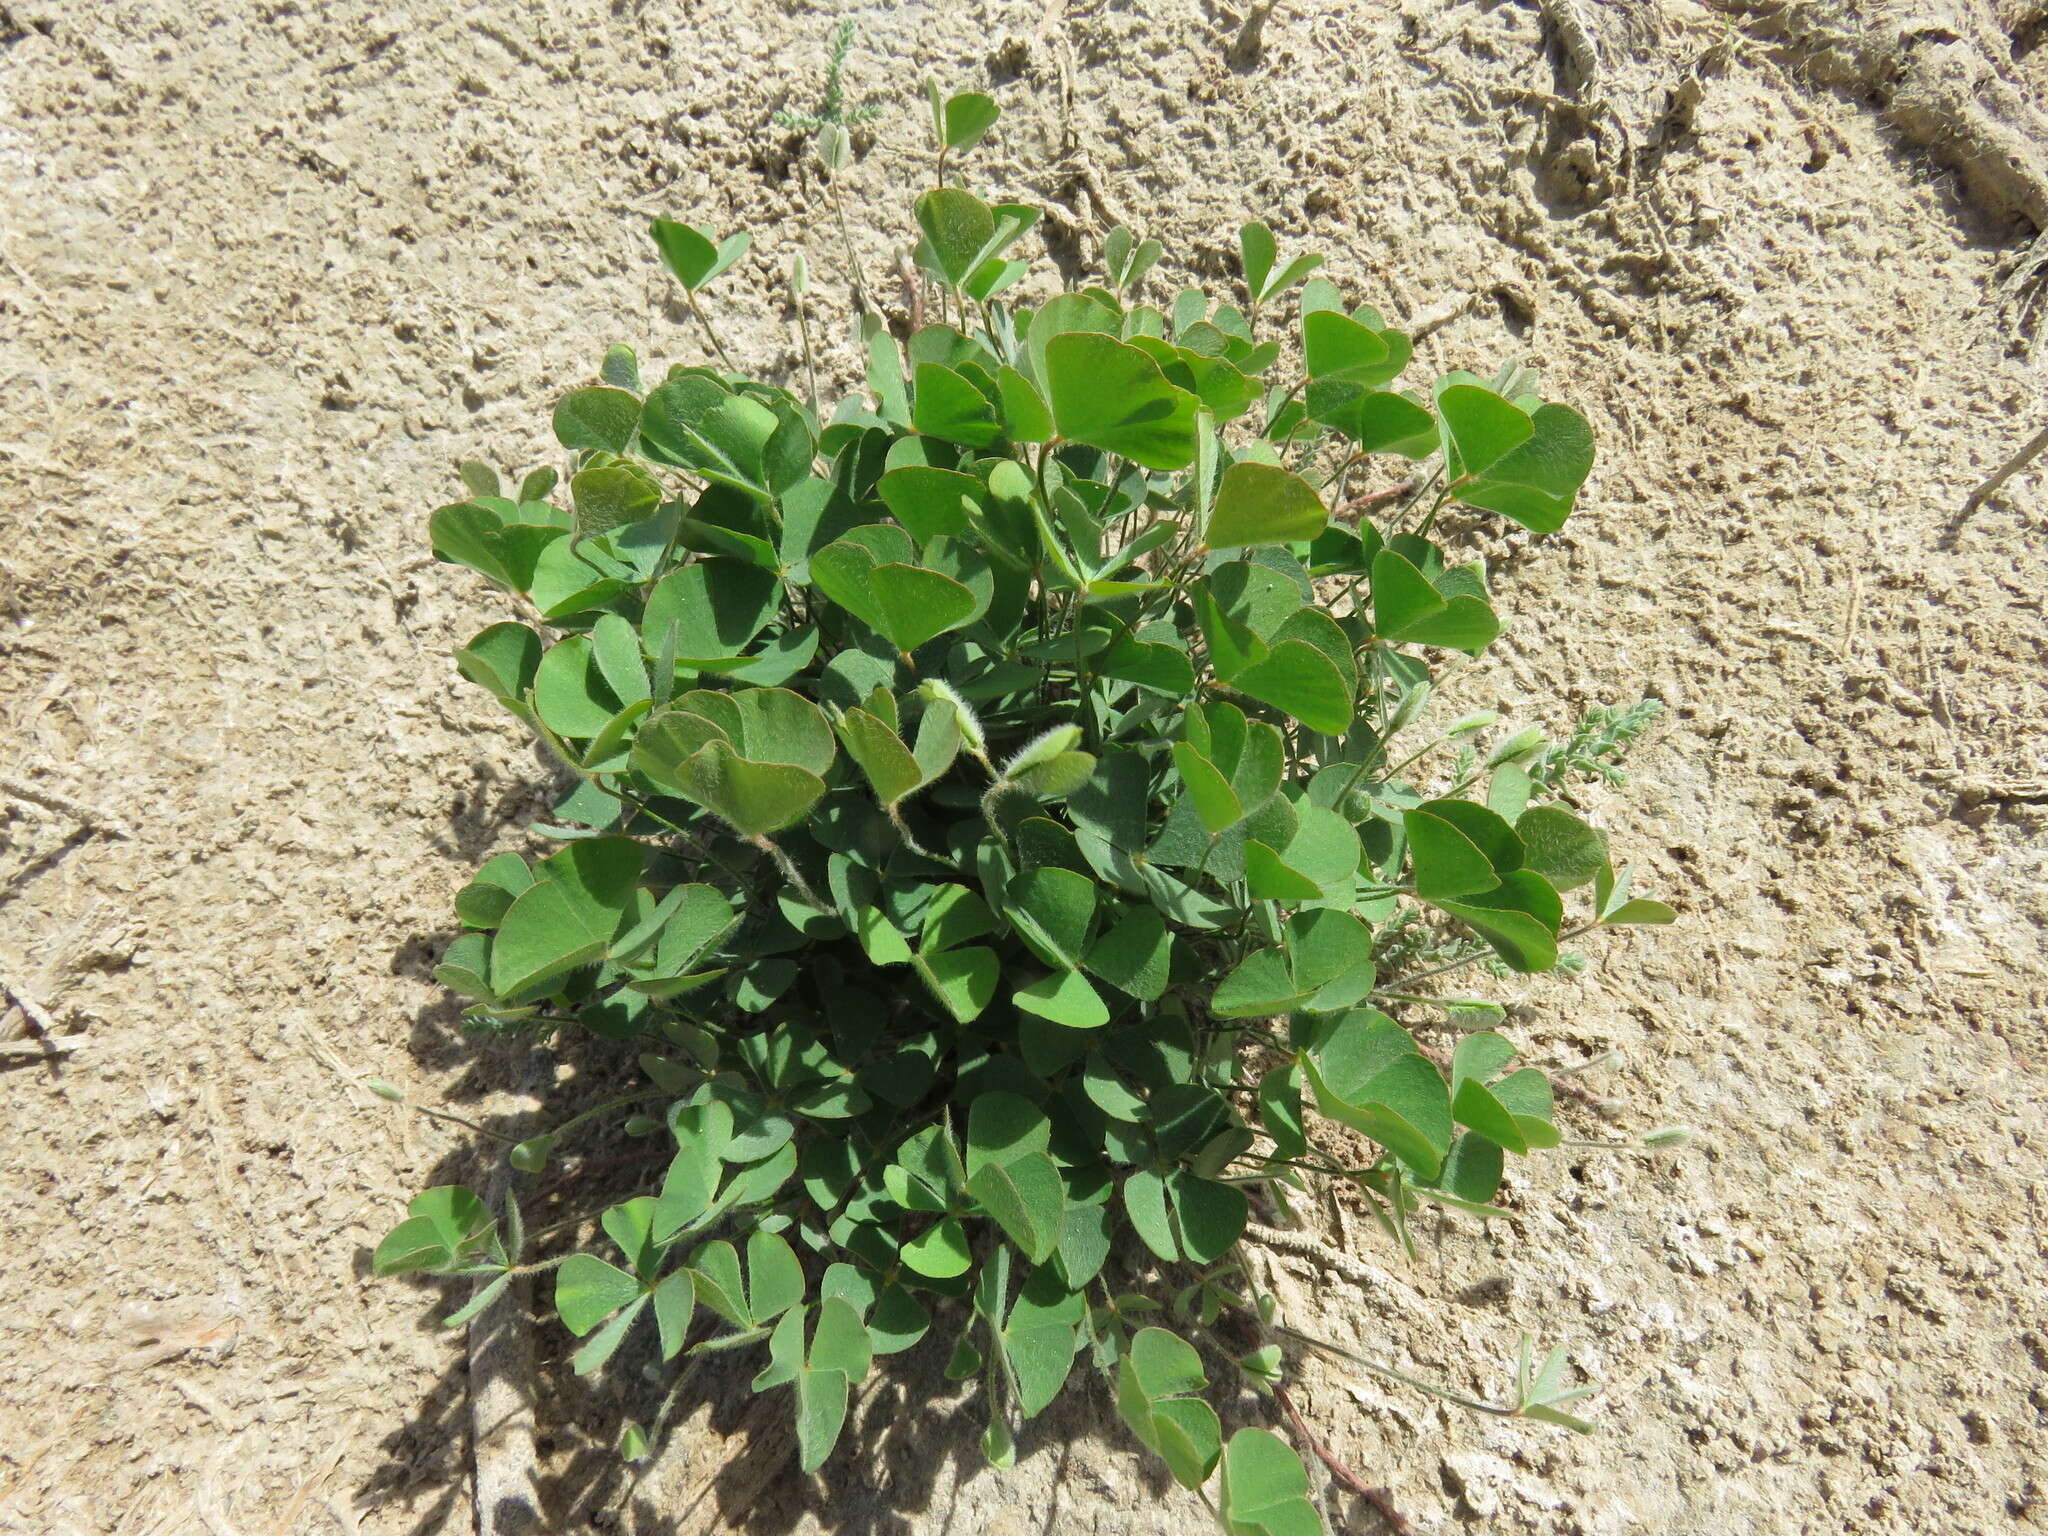 Image of hairy waterclover